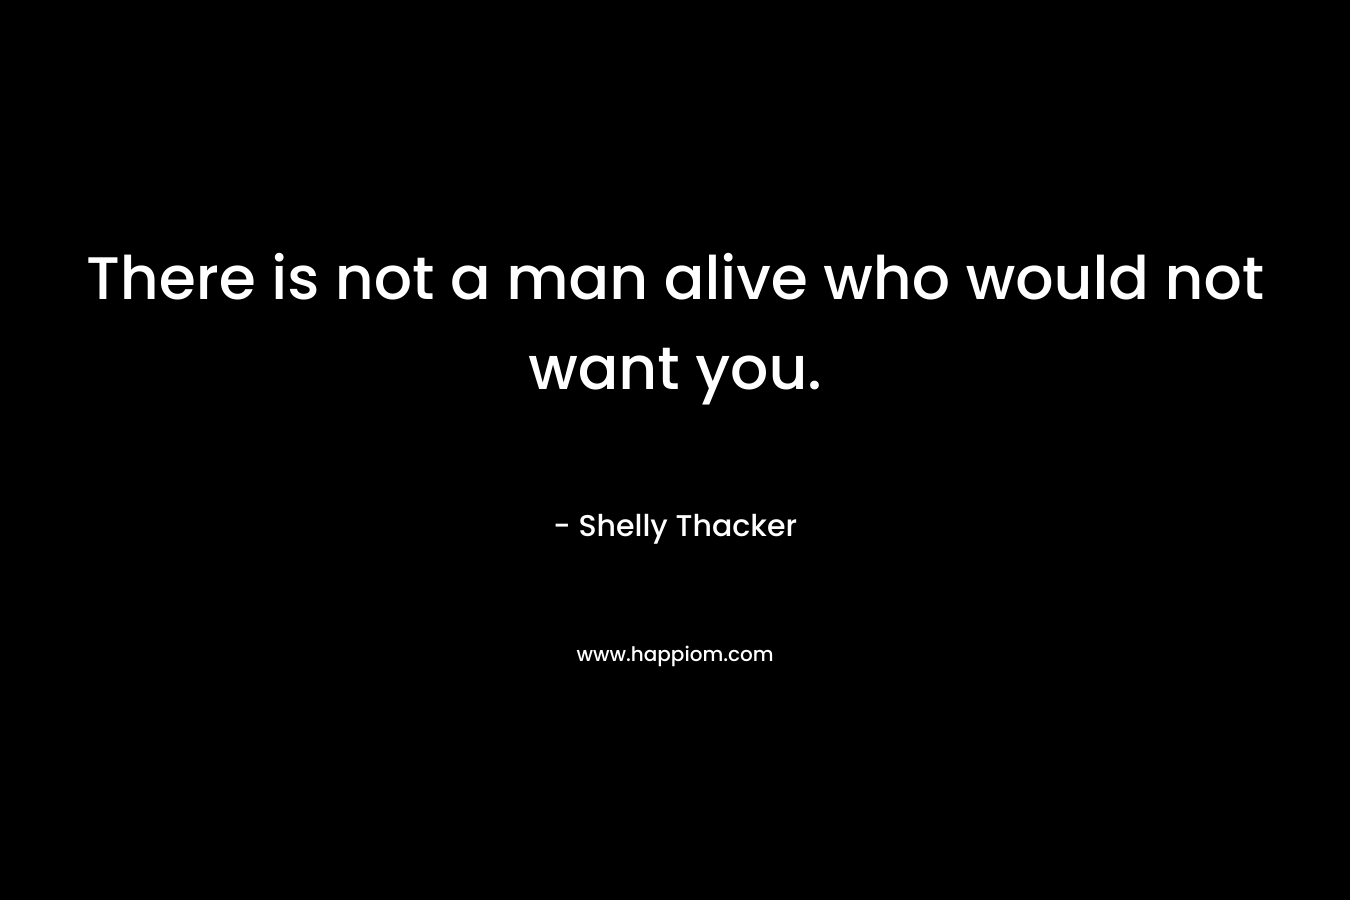 There is not a man alive who would not want you.